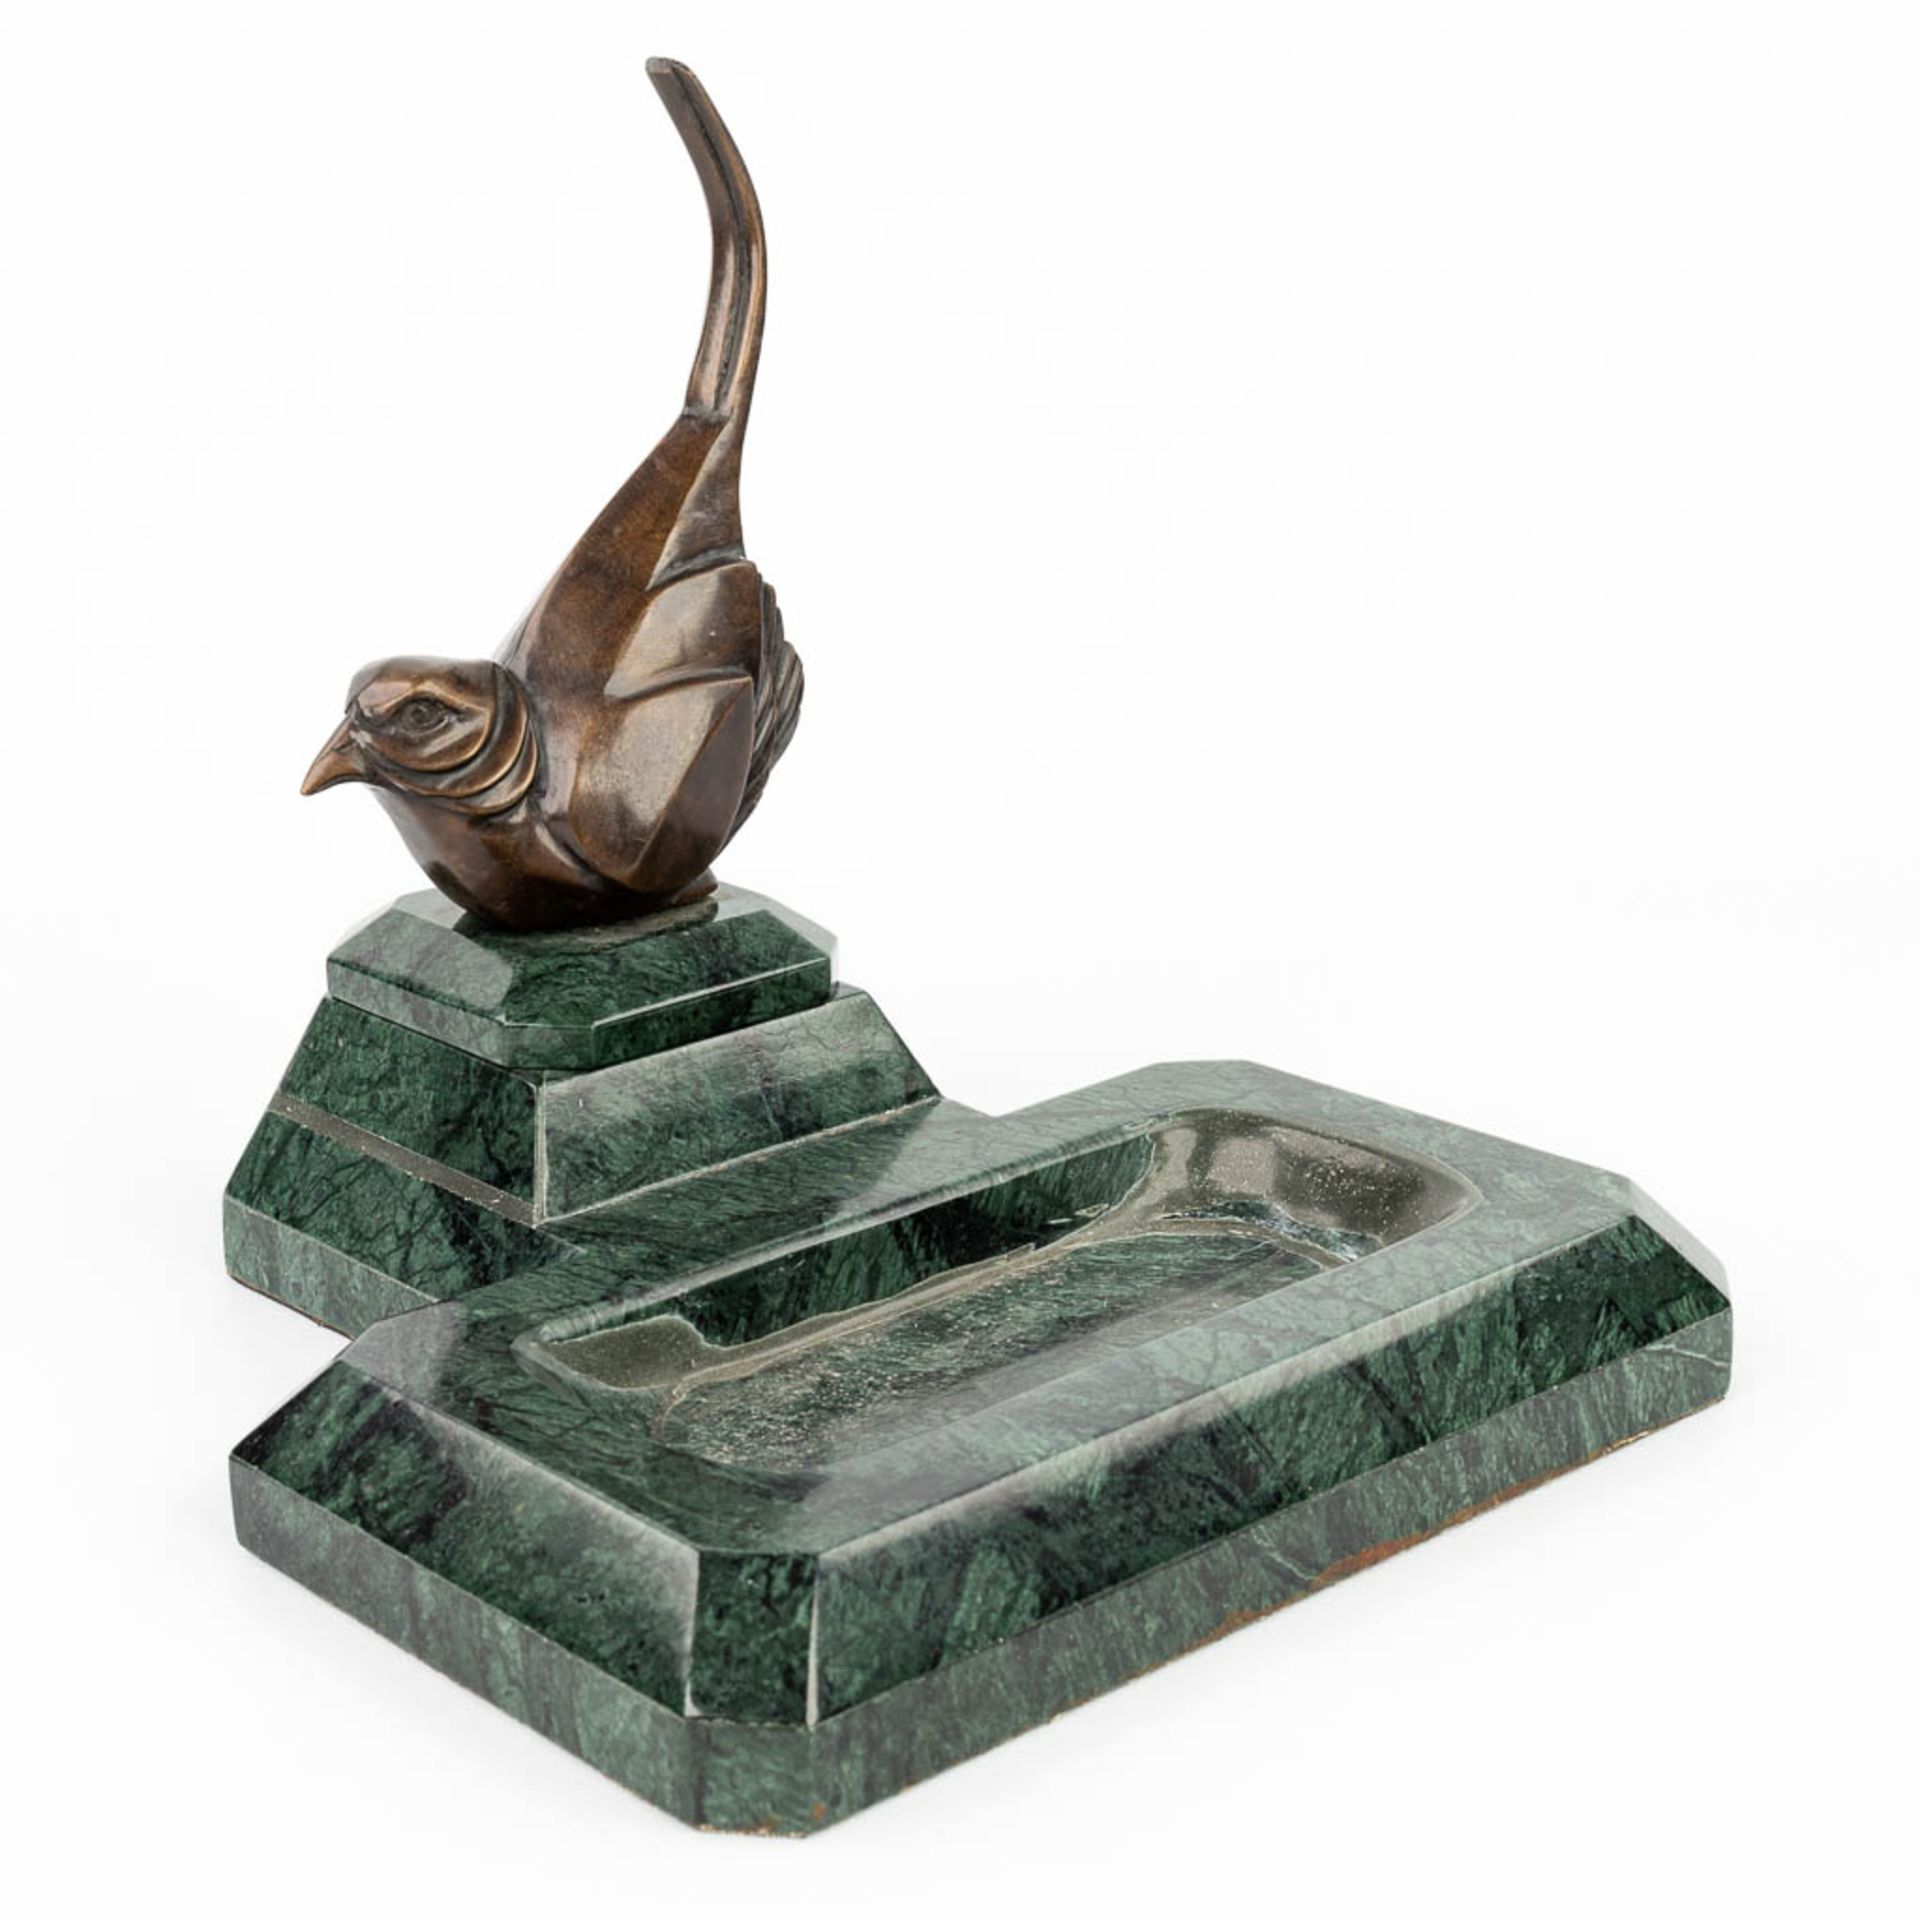 A 'Vide Poche' made of marble with a bird made of bronze in art deco style. - Bild 6 aus 10